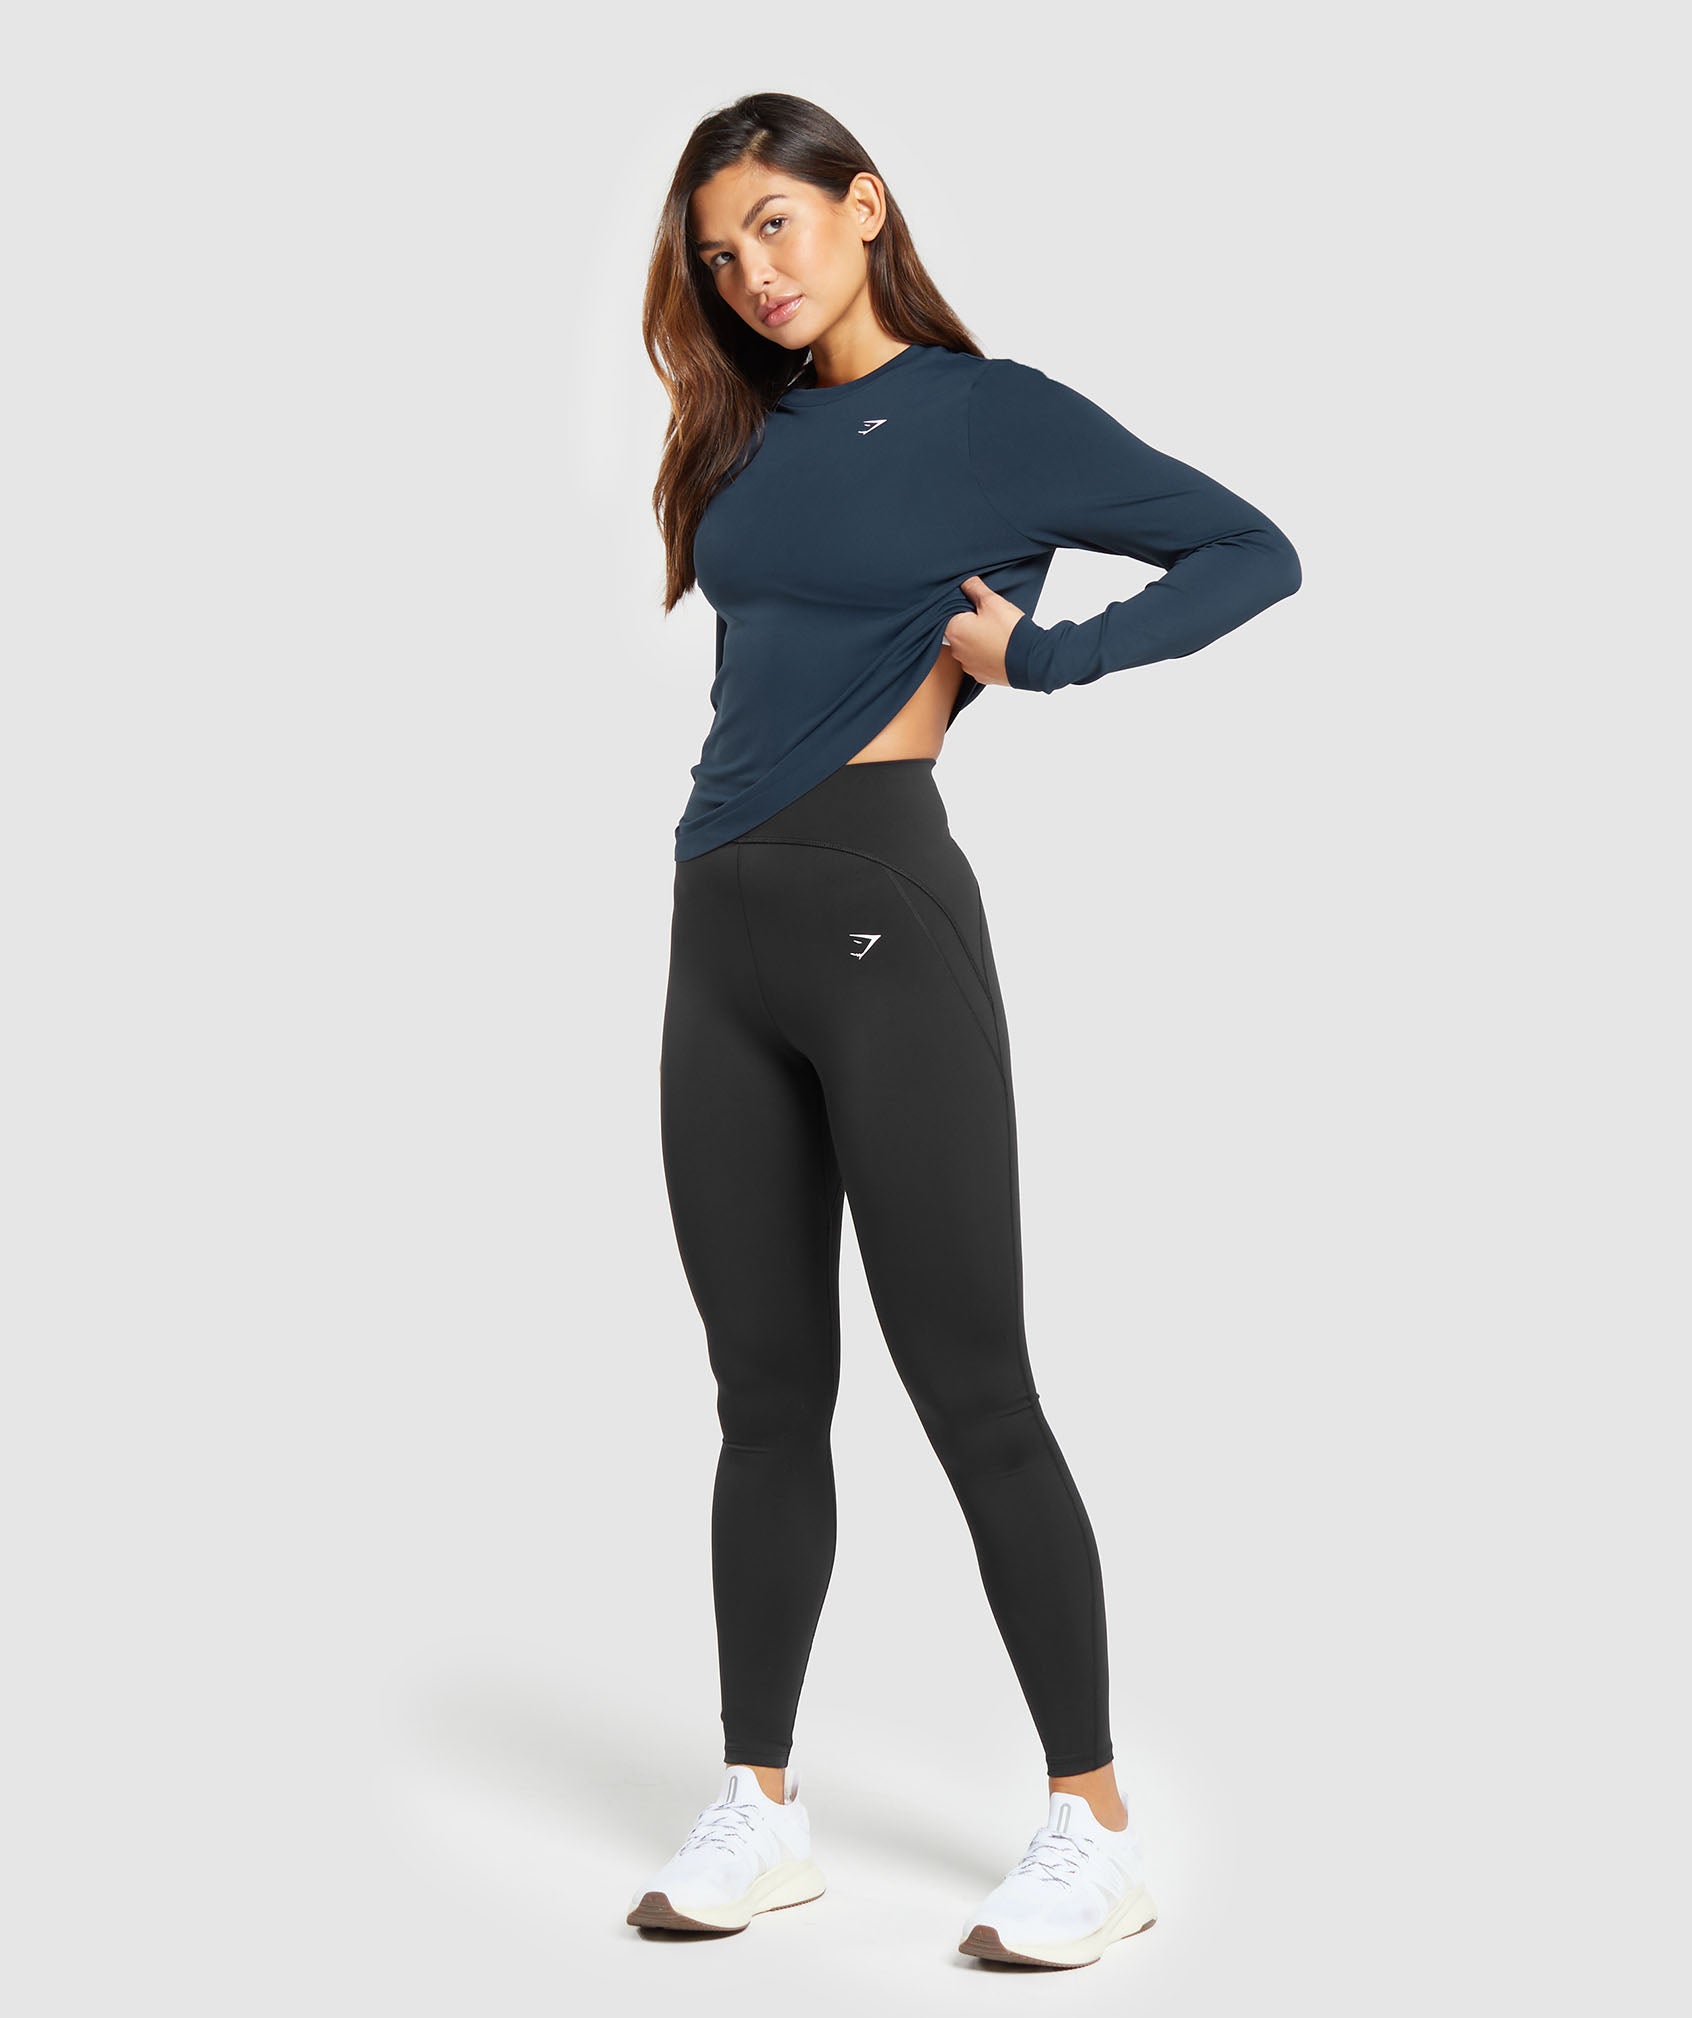 Everyday Seamless Long Sleeve Top in Navy - view 4